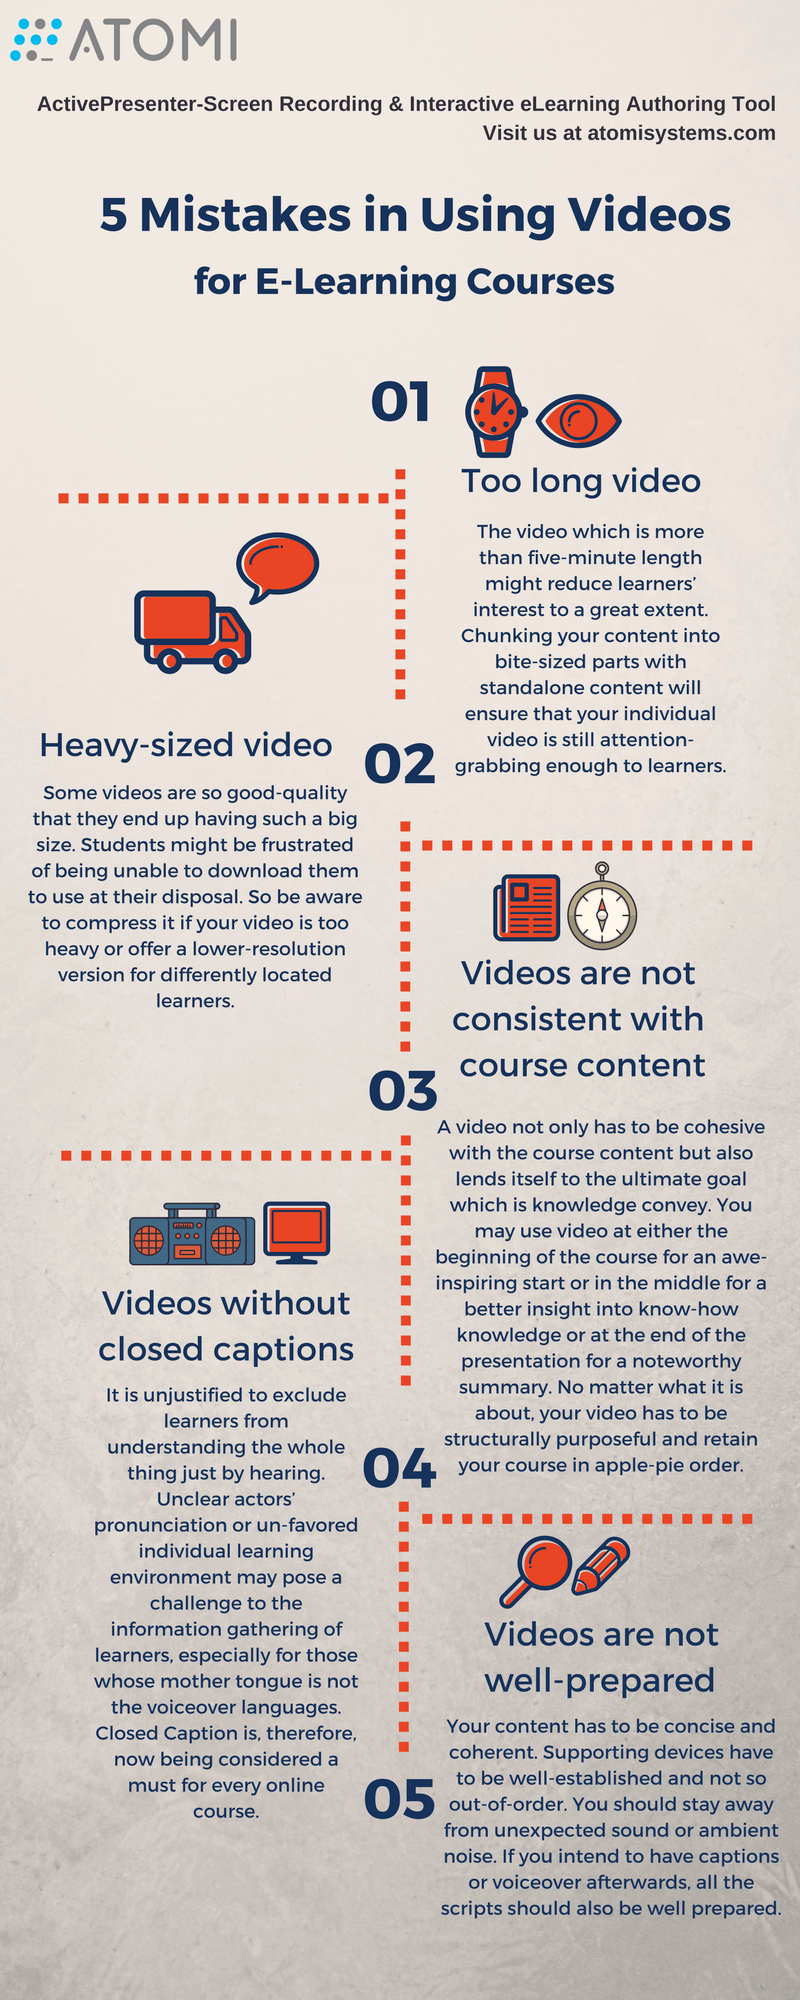 5 Mistakes in Using Videos for eLearning Courses Infographic